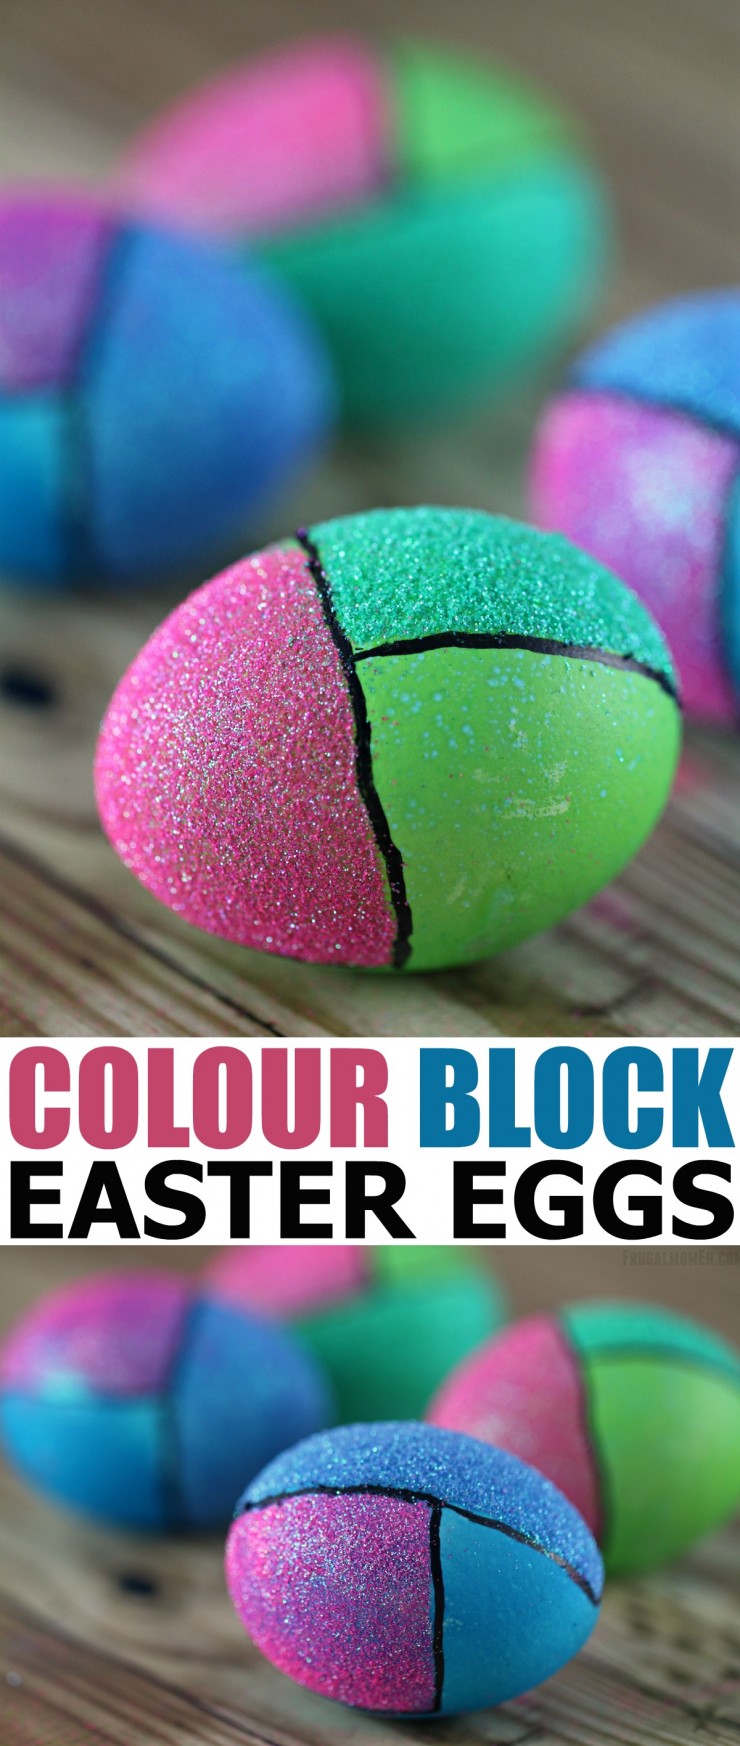 These Colour Block Easter Eggs are modern and full of glitter. These are Easter Eggs that will stand out and really make your easter home decor!